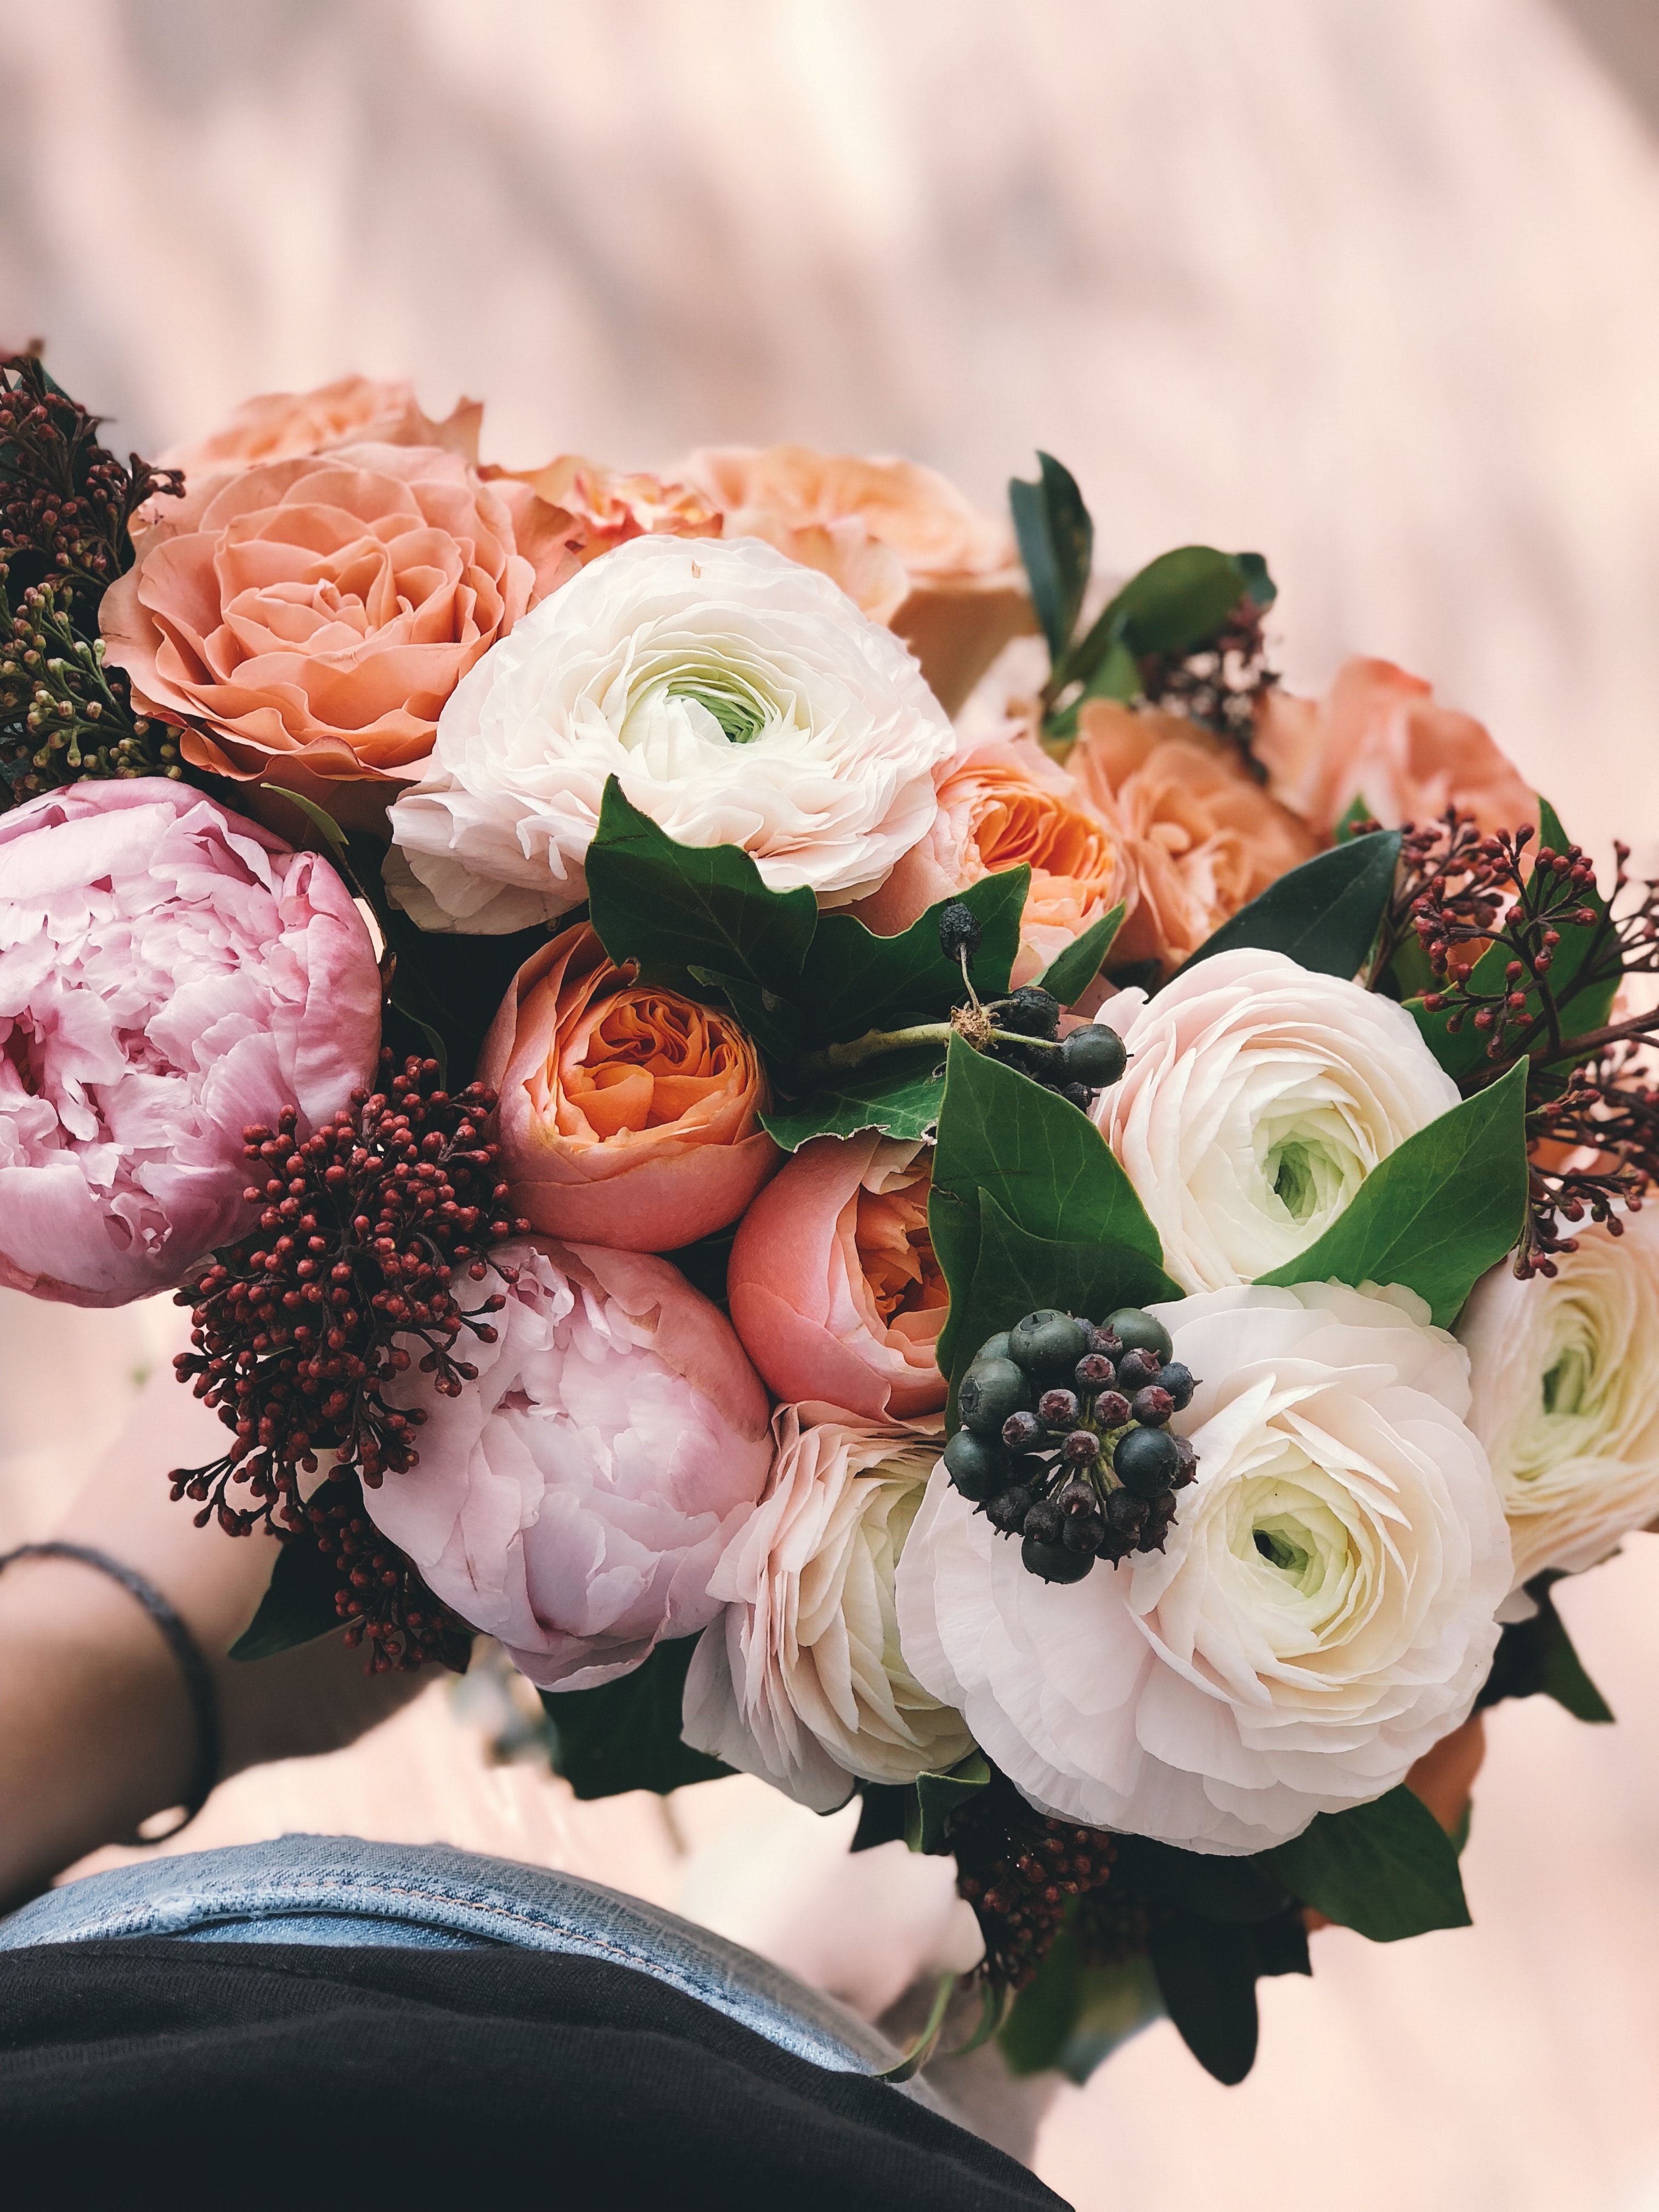 White, pink, and orange rose bouquet photo